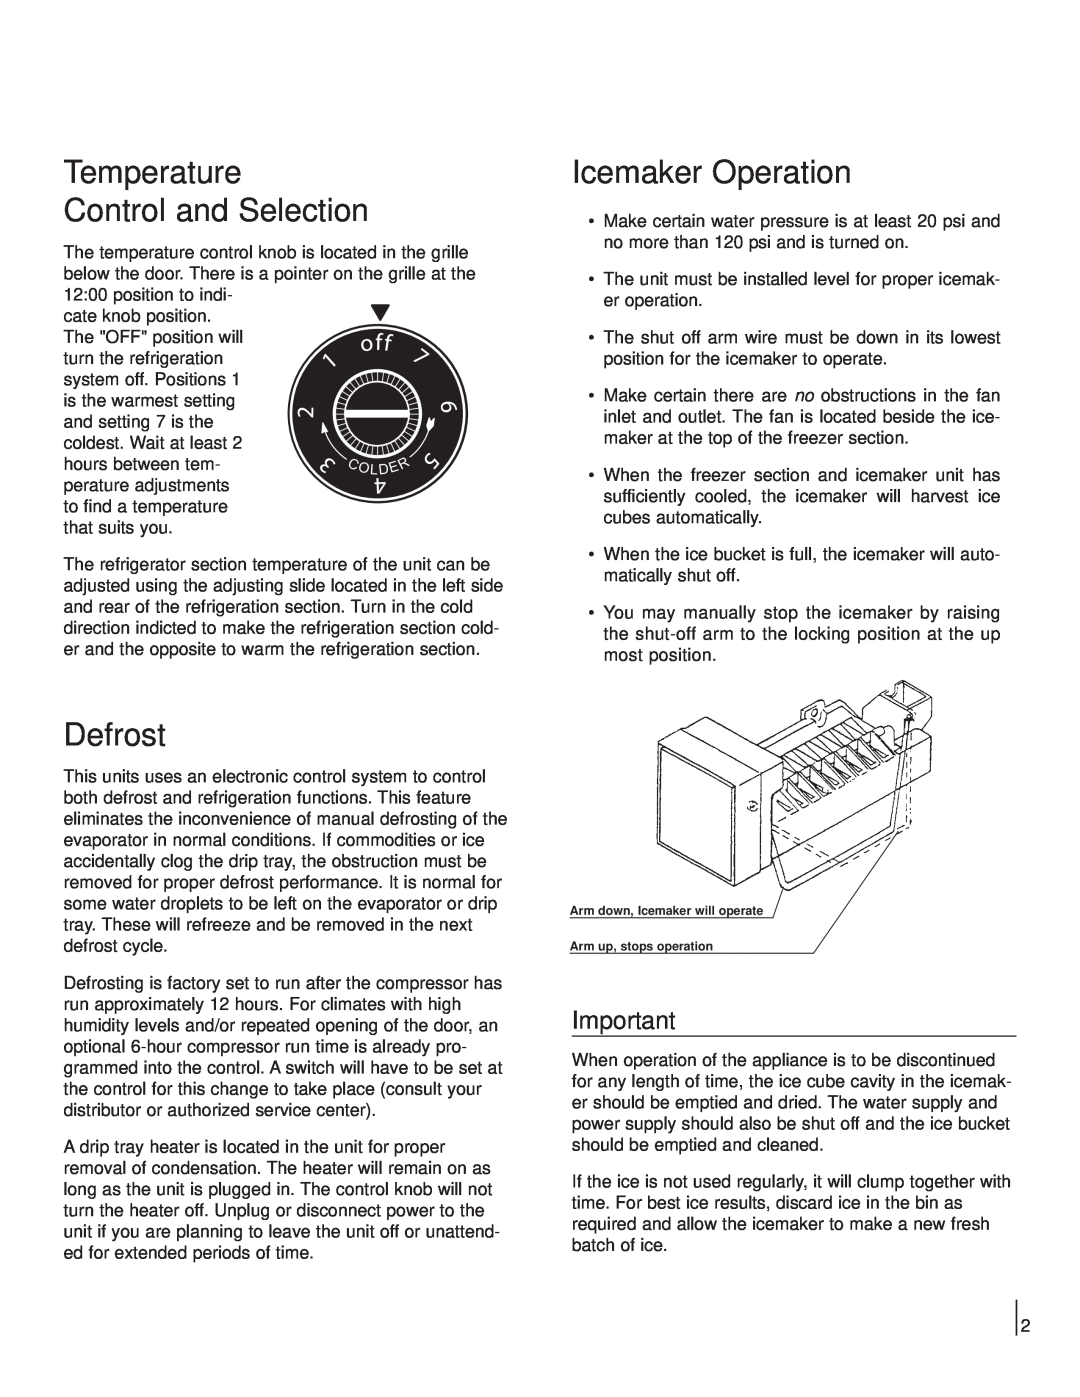 Marvel Industries 6CiM manual Temperature Control and Selection, Icemaker Operation, Defrost 